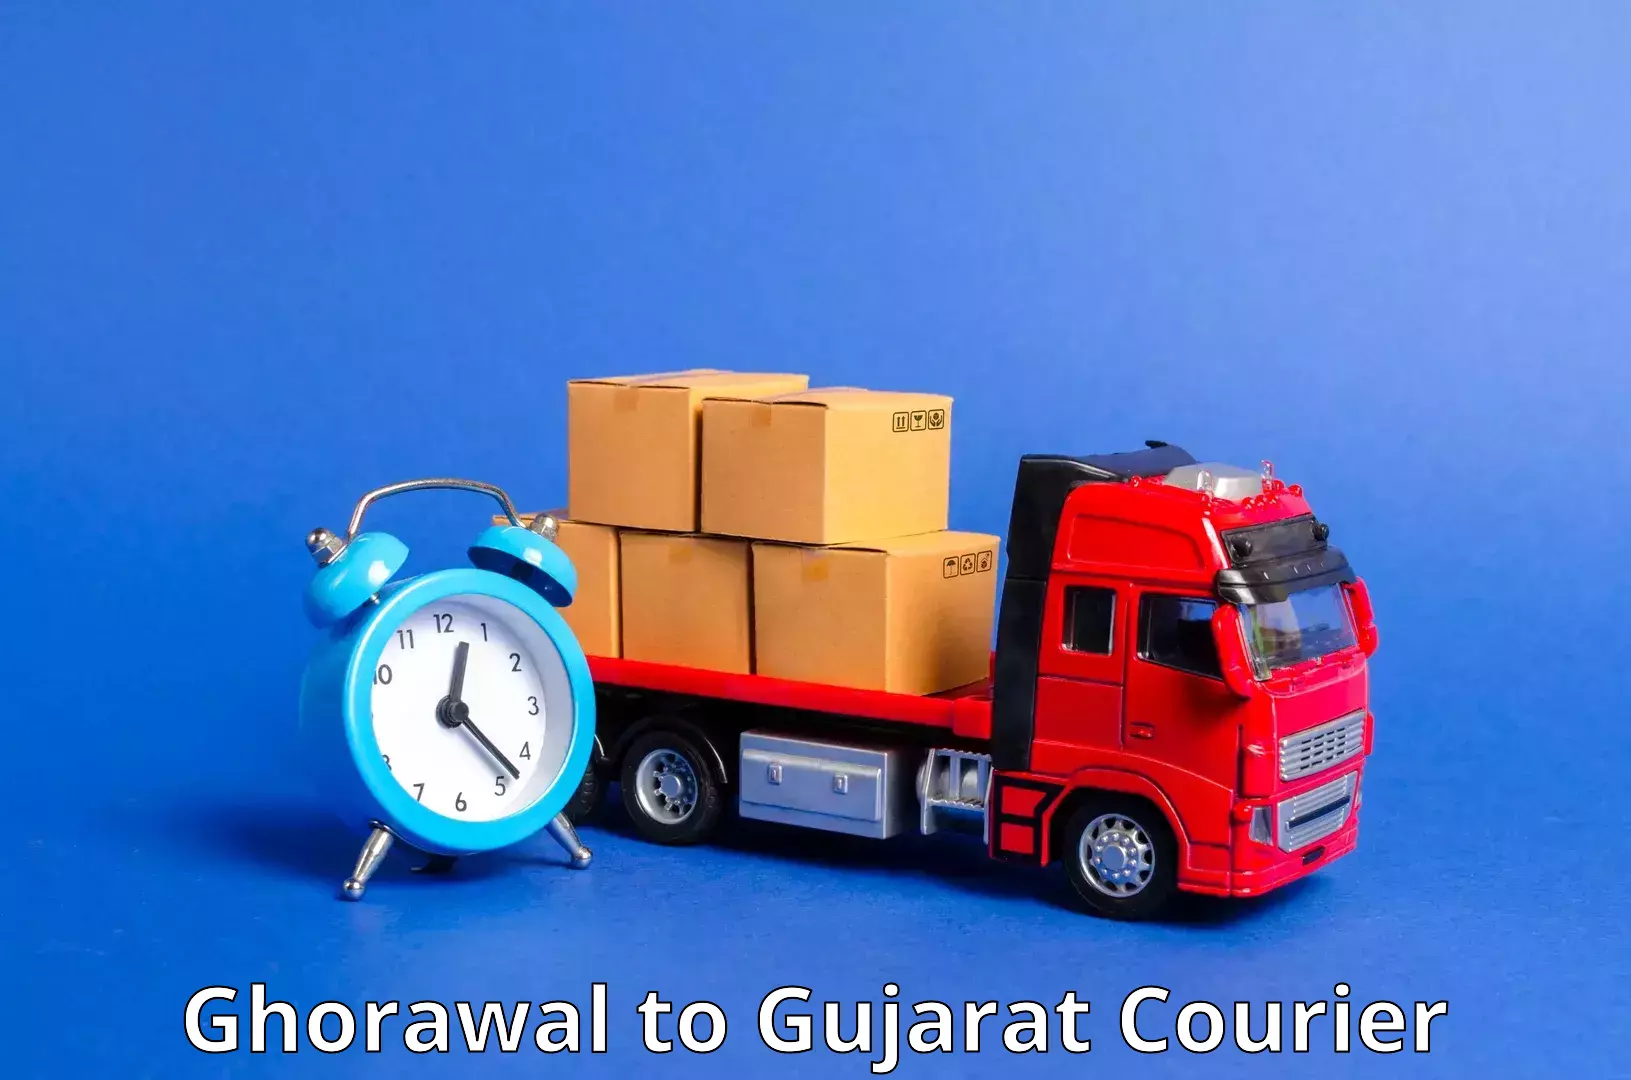 Professional courier handling Ghorawal to Gondal